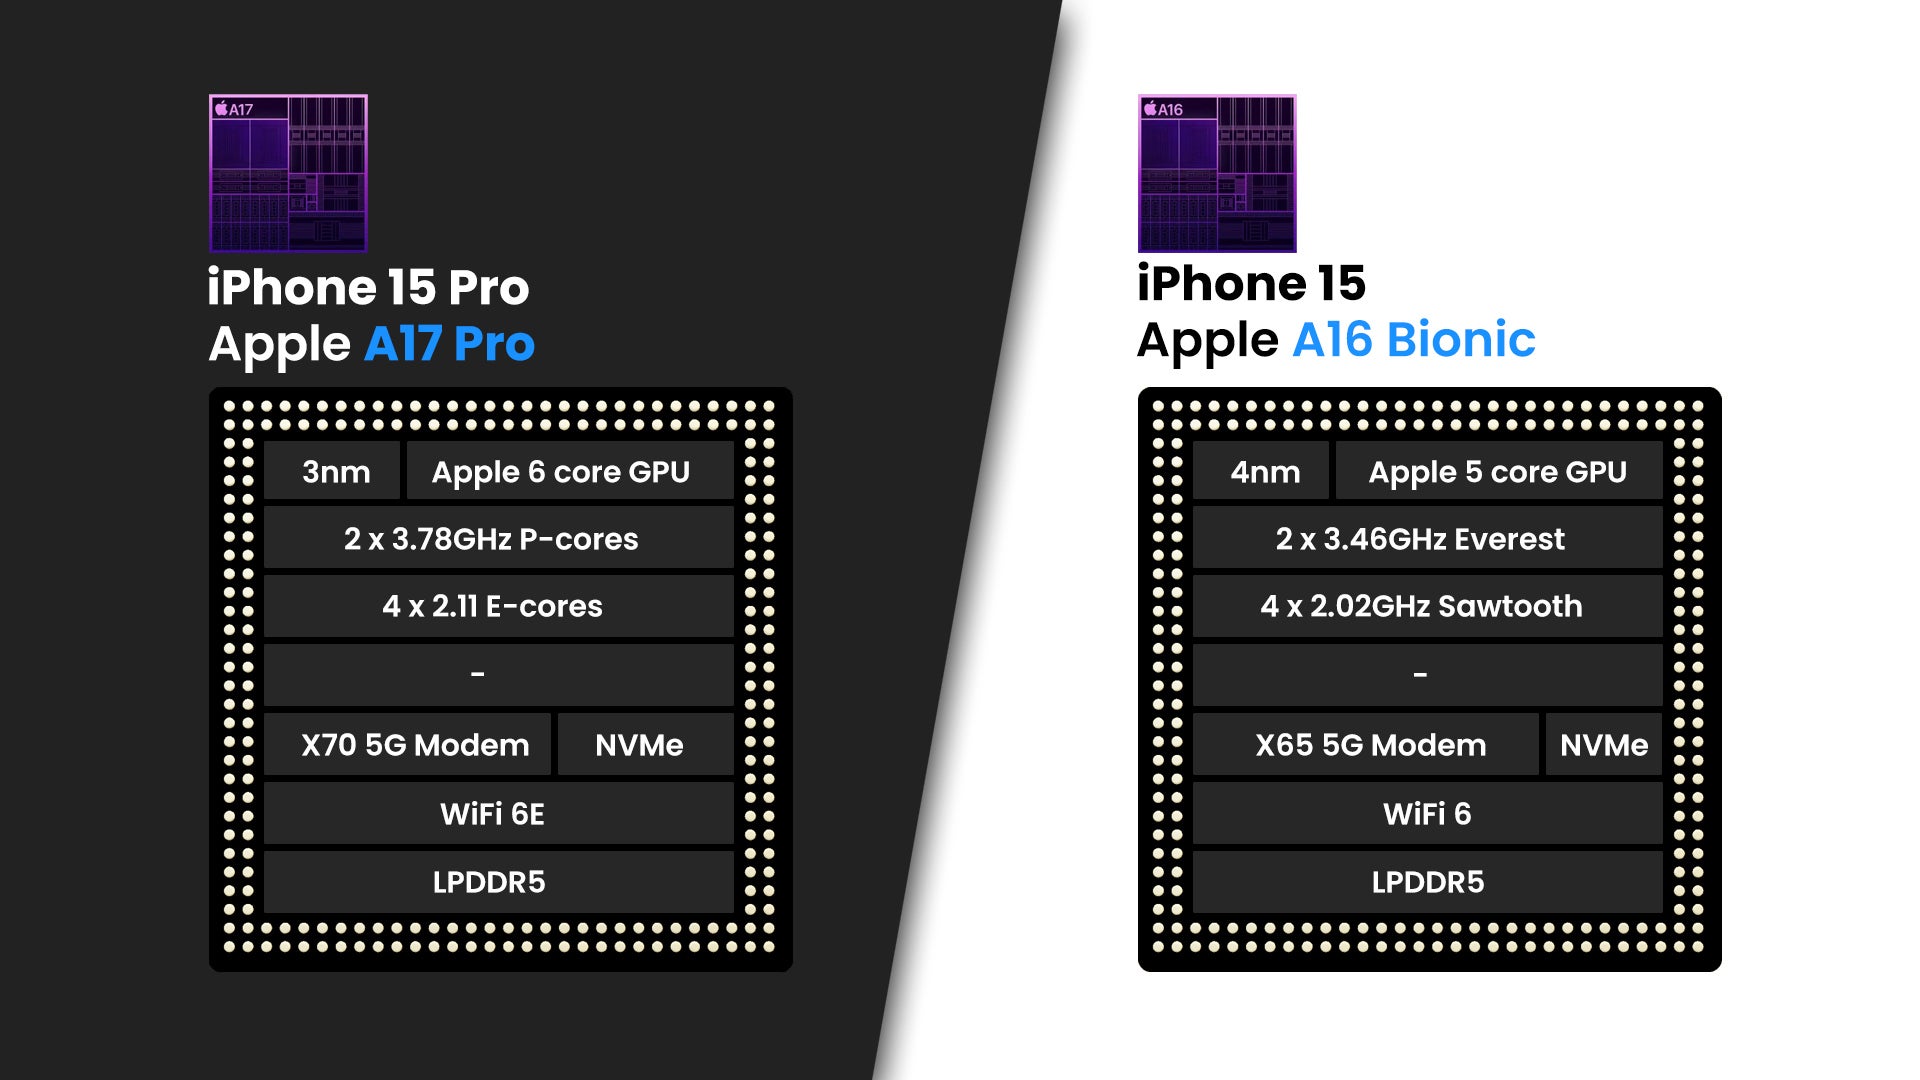 iPhone 15 Pro vs iPhone 15: which one should you go for?